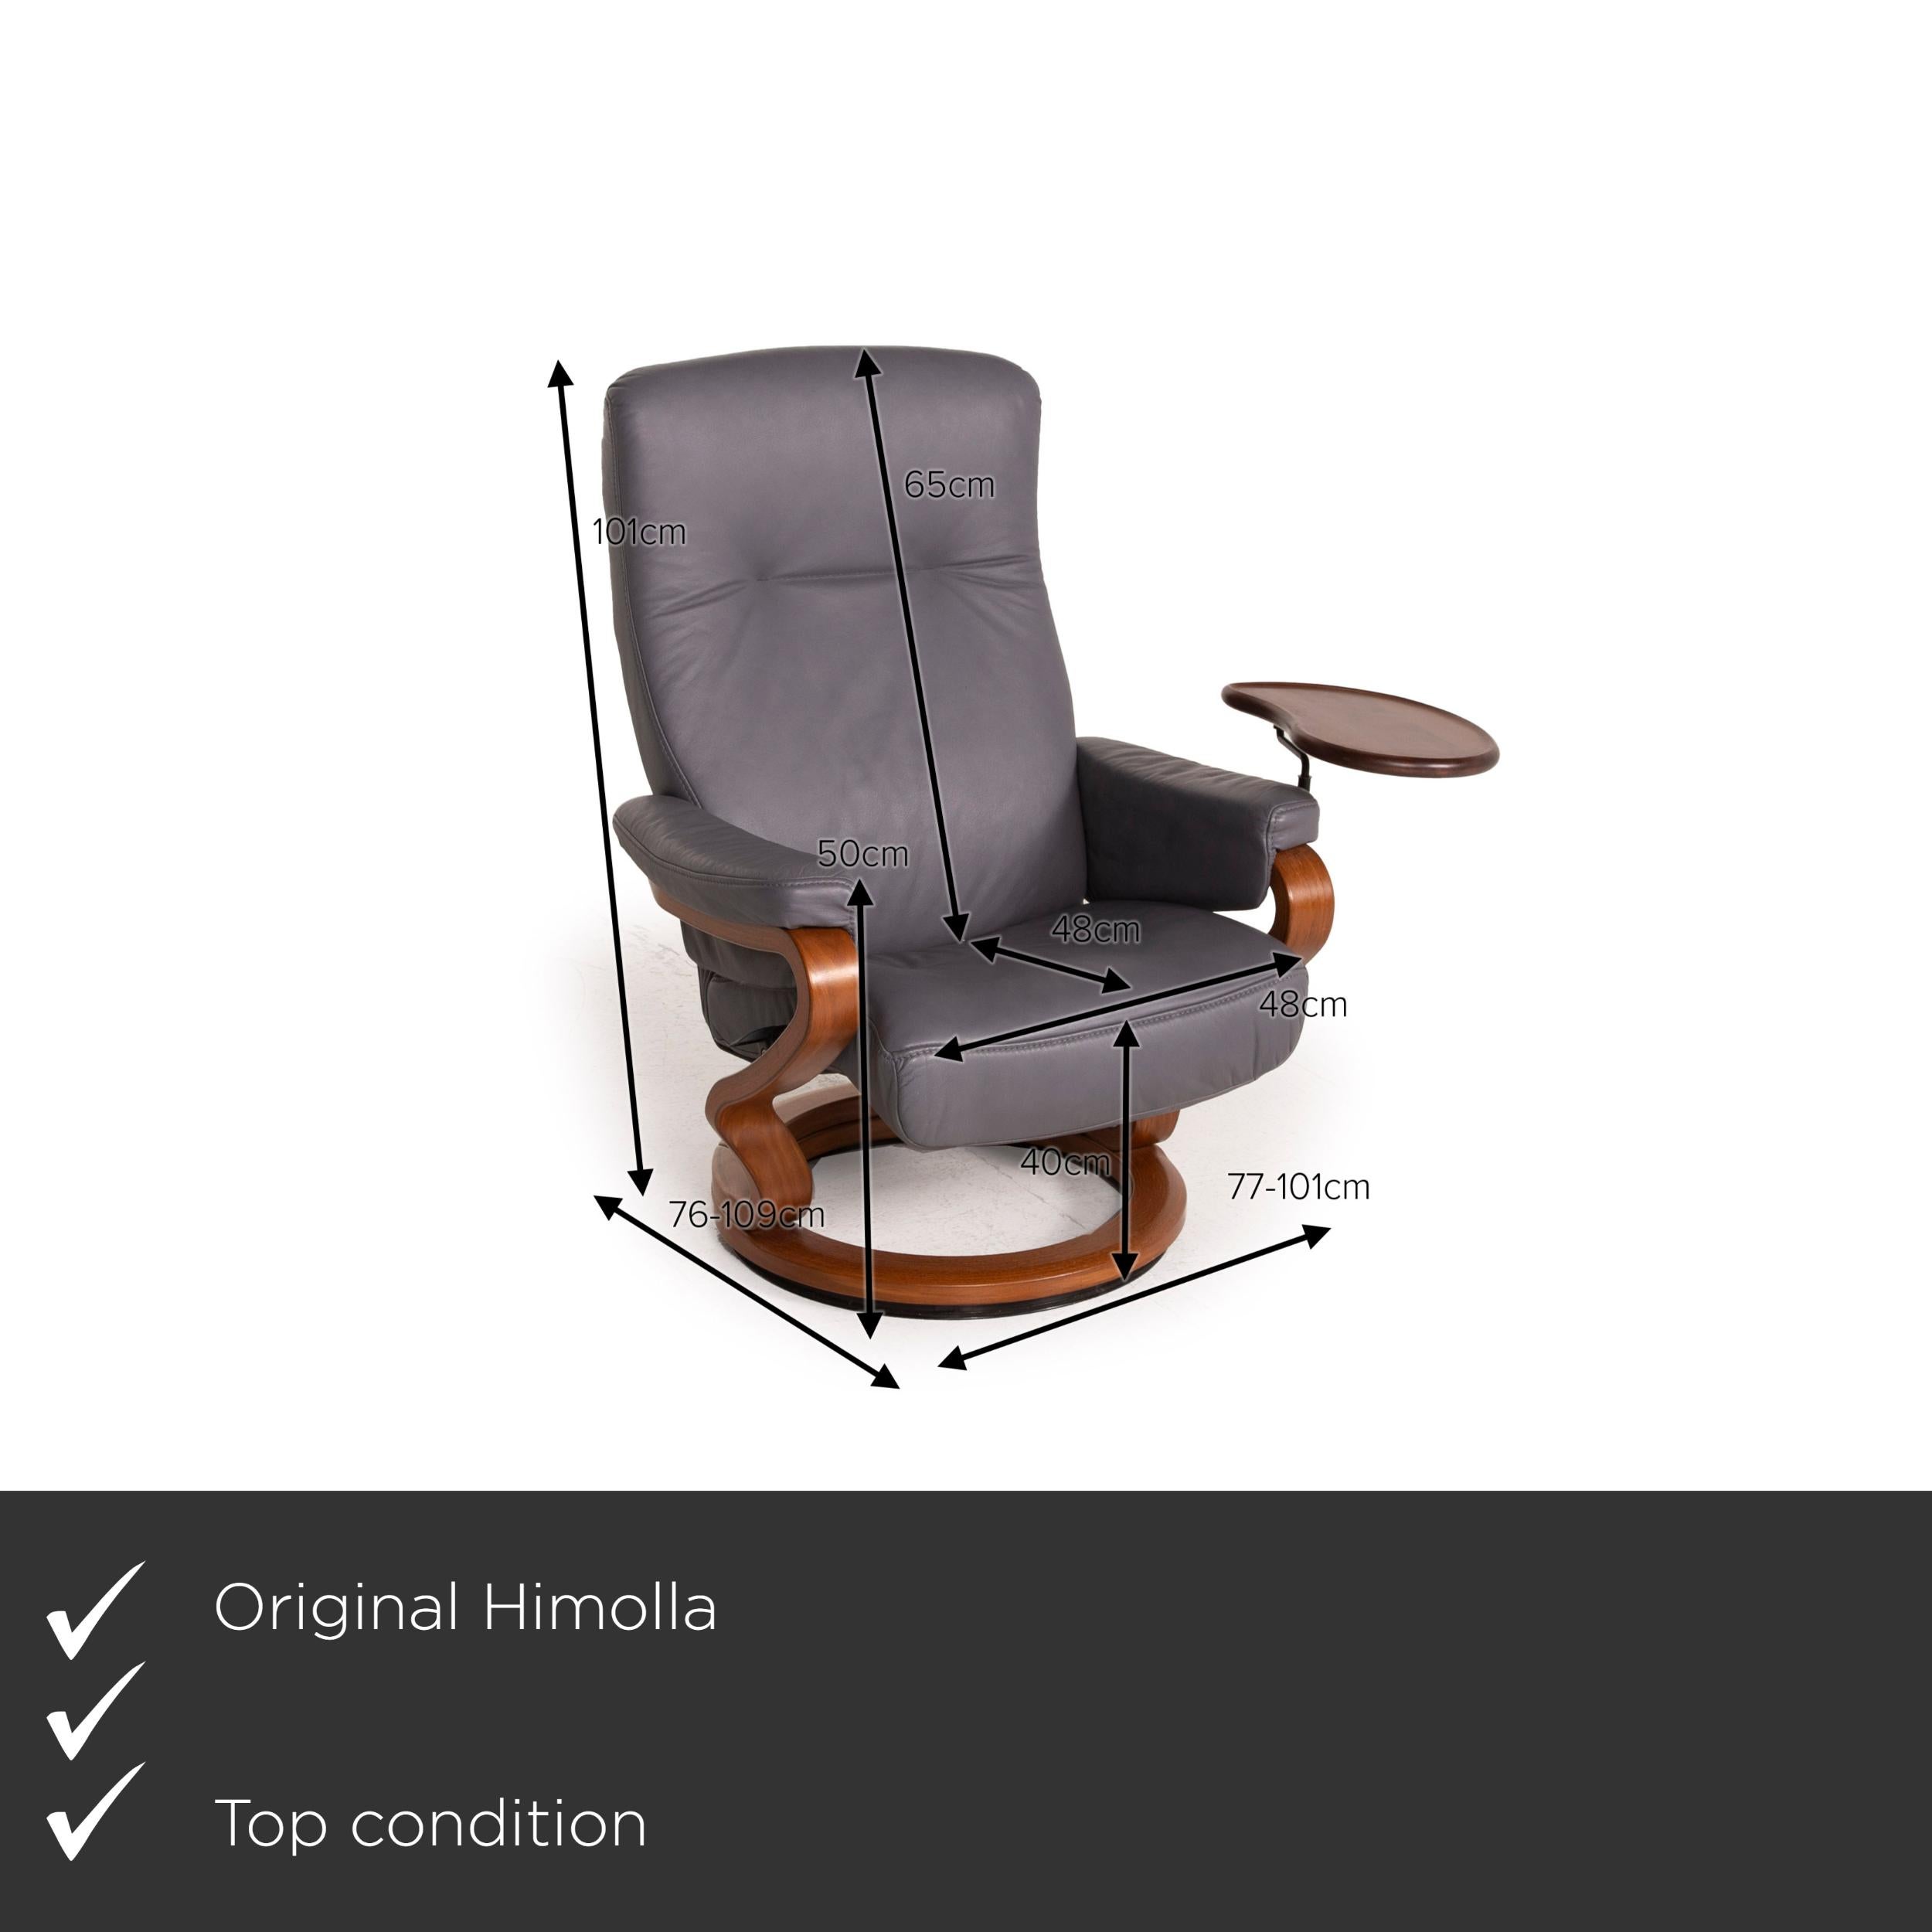 We present to you a Himolla leather armchair set gray relax function table set 4x.
  
 

 Product measurements in centimeters:
 

Depth: 76
Width: 77
Height: 101
Seat height: 40
Rest height: 55
Seat depth: 48
Seat width: 48
Back